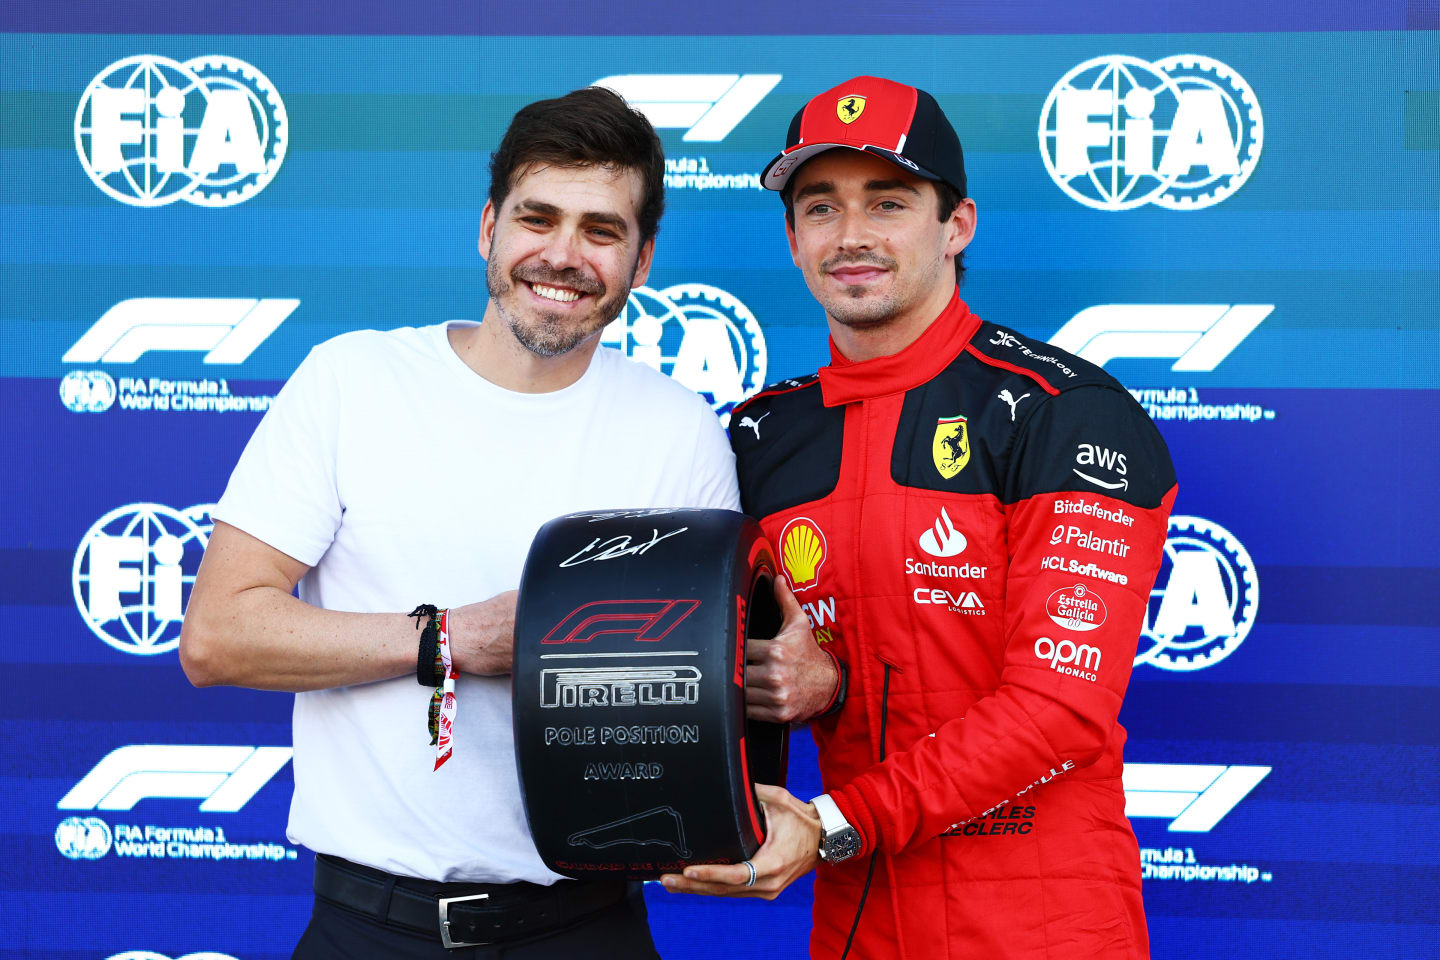 MEXICO CITY, MEXICO - OCTOBER 28: Pole position qualifier Charles Leclerc of Monaco and Ferrari is presented with the Pirelli Pole Position Award. by Jimmy Alvarez in parc ferme during qualifying ahead of the F1 Grand Prix of Mexico at Autodromo Hermanos Rodriguez on October 28, 2023 in Mexico City, Mexico. (Photo by Mark Thompson/Getty Images)